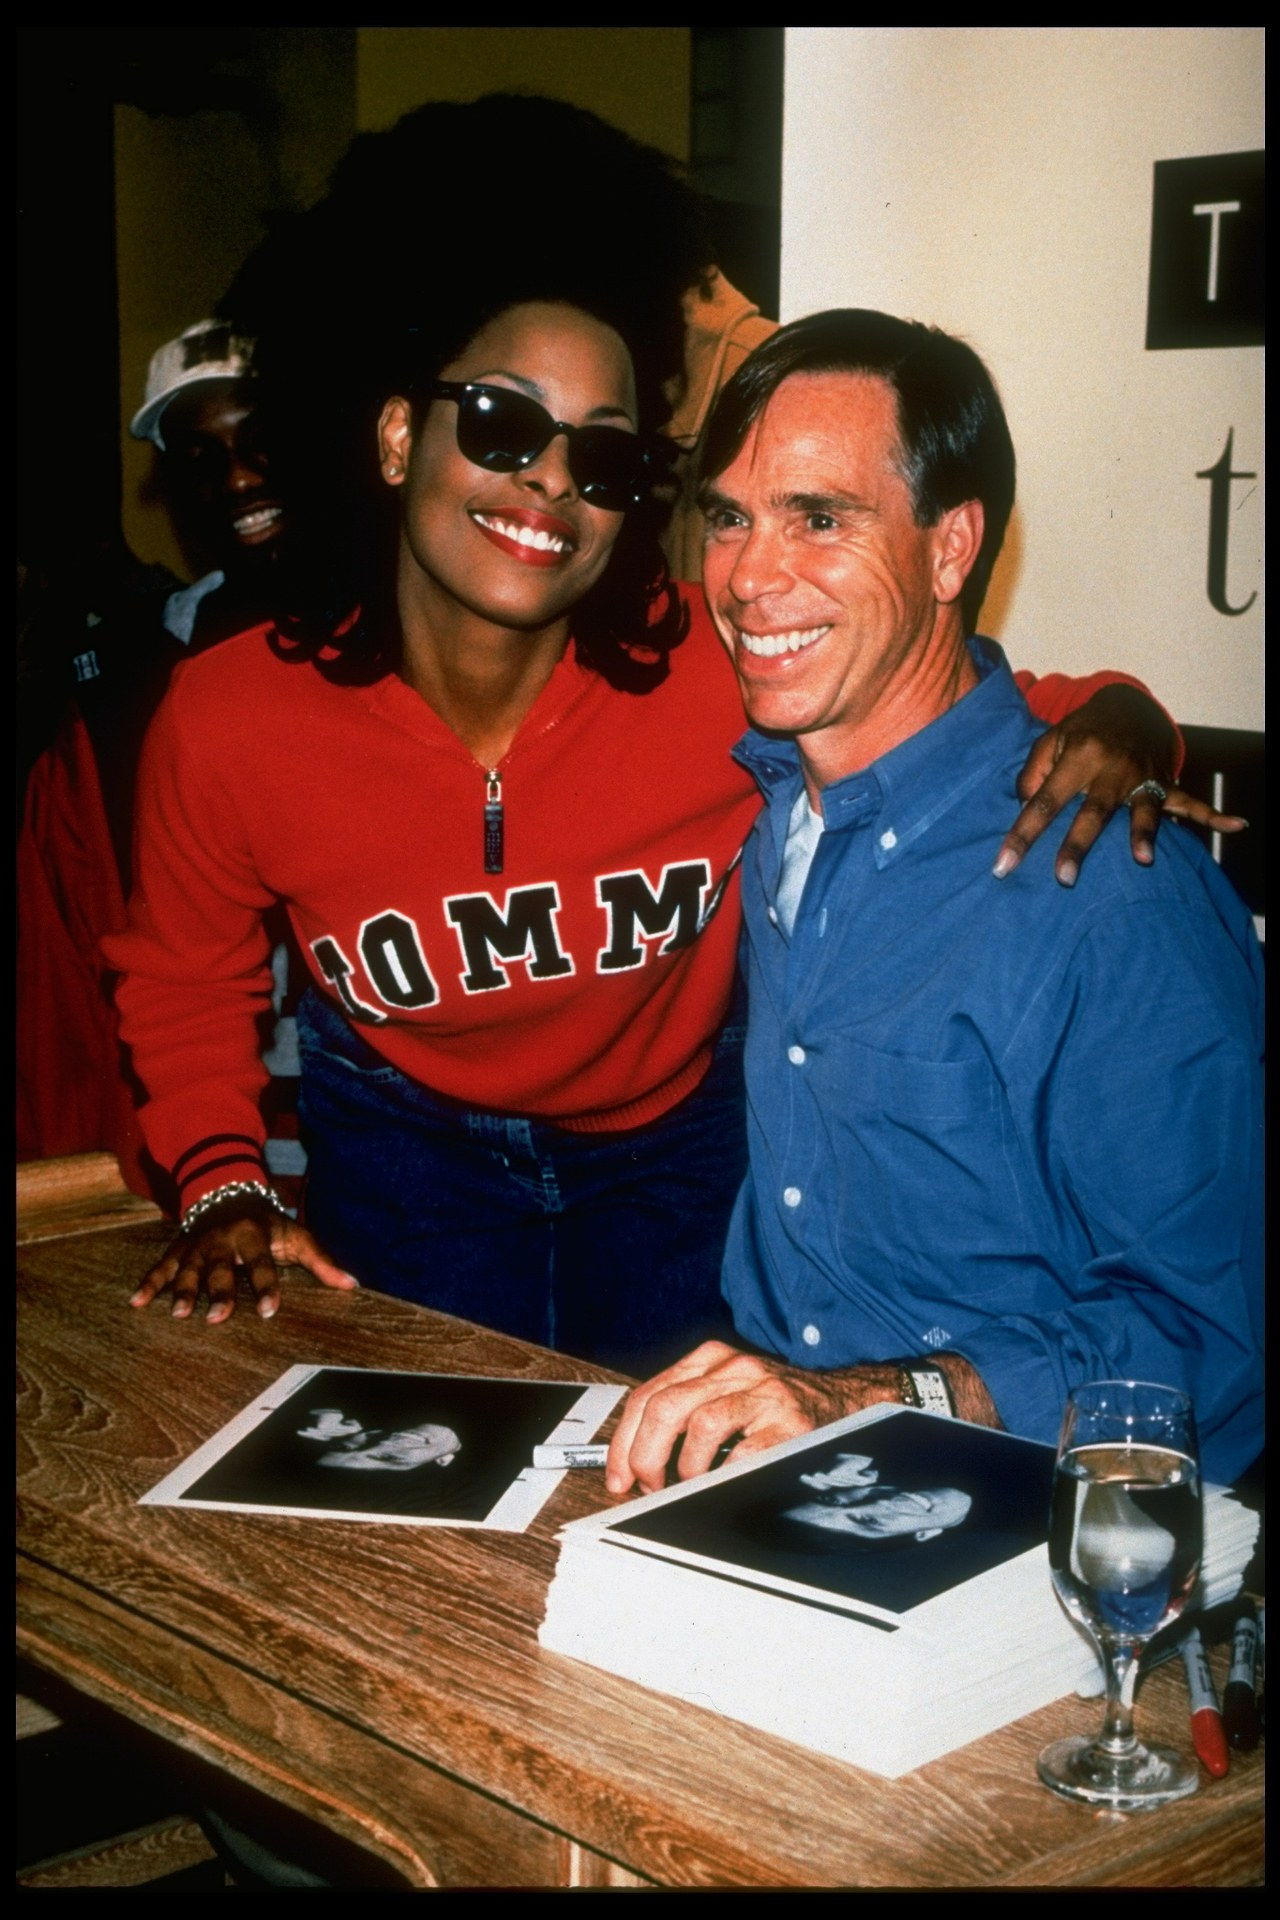 Mode designer Tommy Hilfiger (R) w. rap singer/model Spinerella w. stack of his publicity portraits at autograph party to launch his new women's clothing line called Tommy Girl, at Bloomingdale's dept. store. (Photo by James Keyser/The LIFE Images Collection/Getty Images)